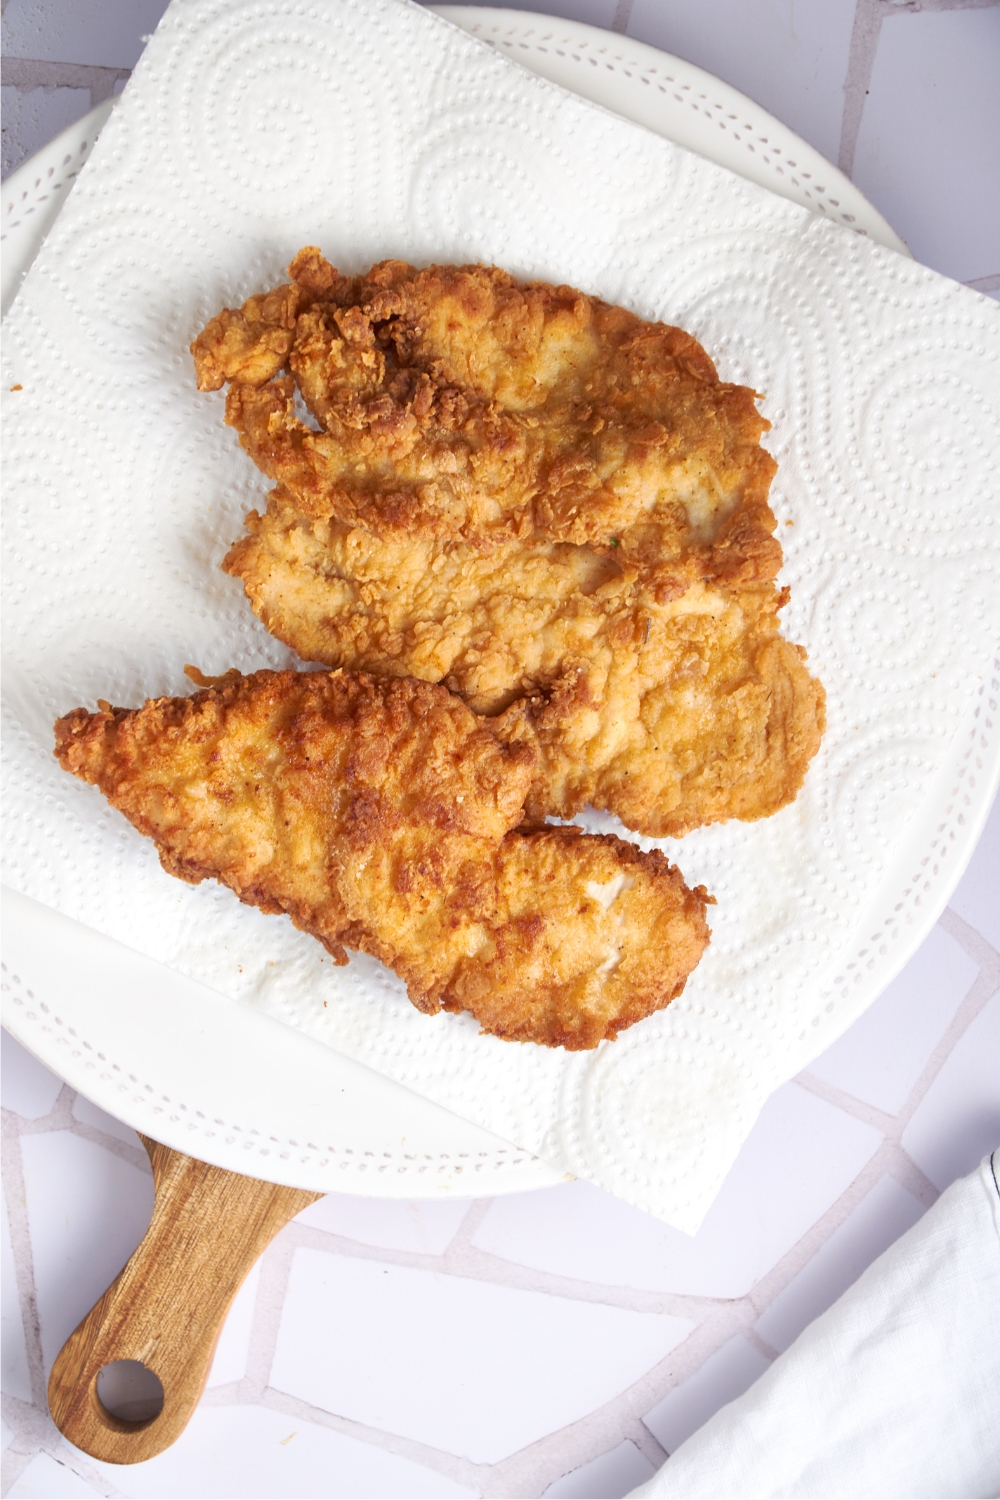 A paper-towel lined plate with three pieces of fried chicken on it.